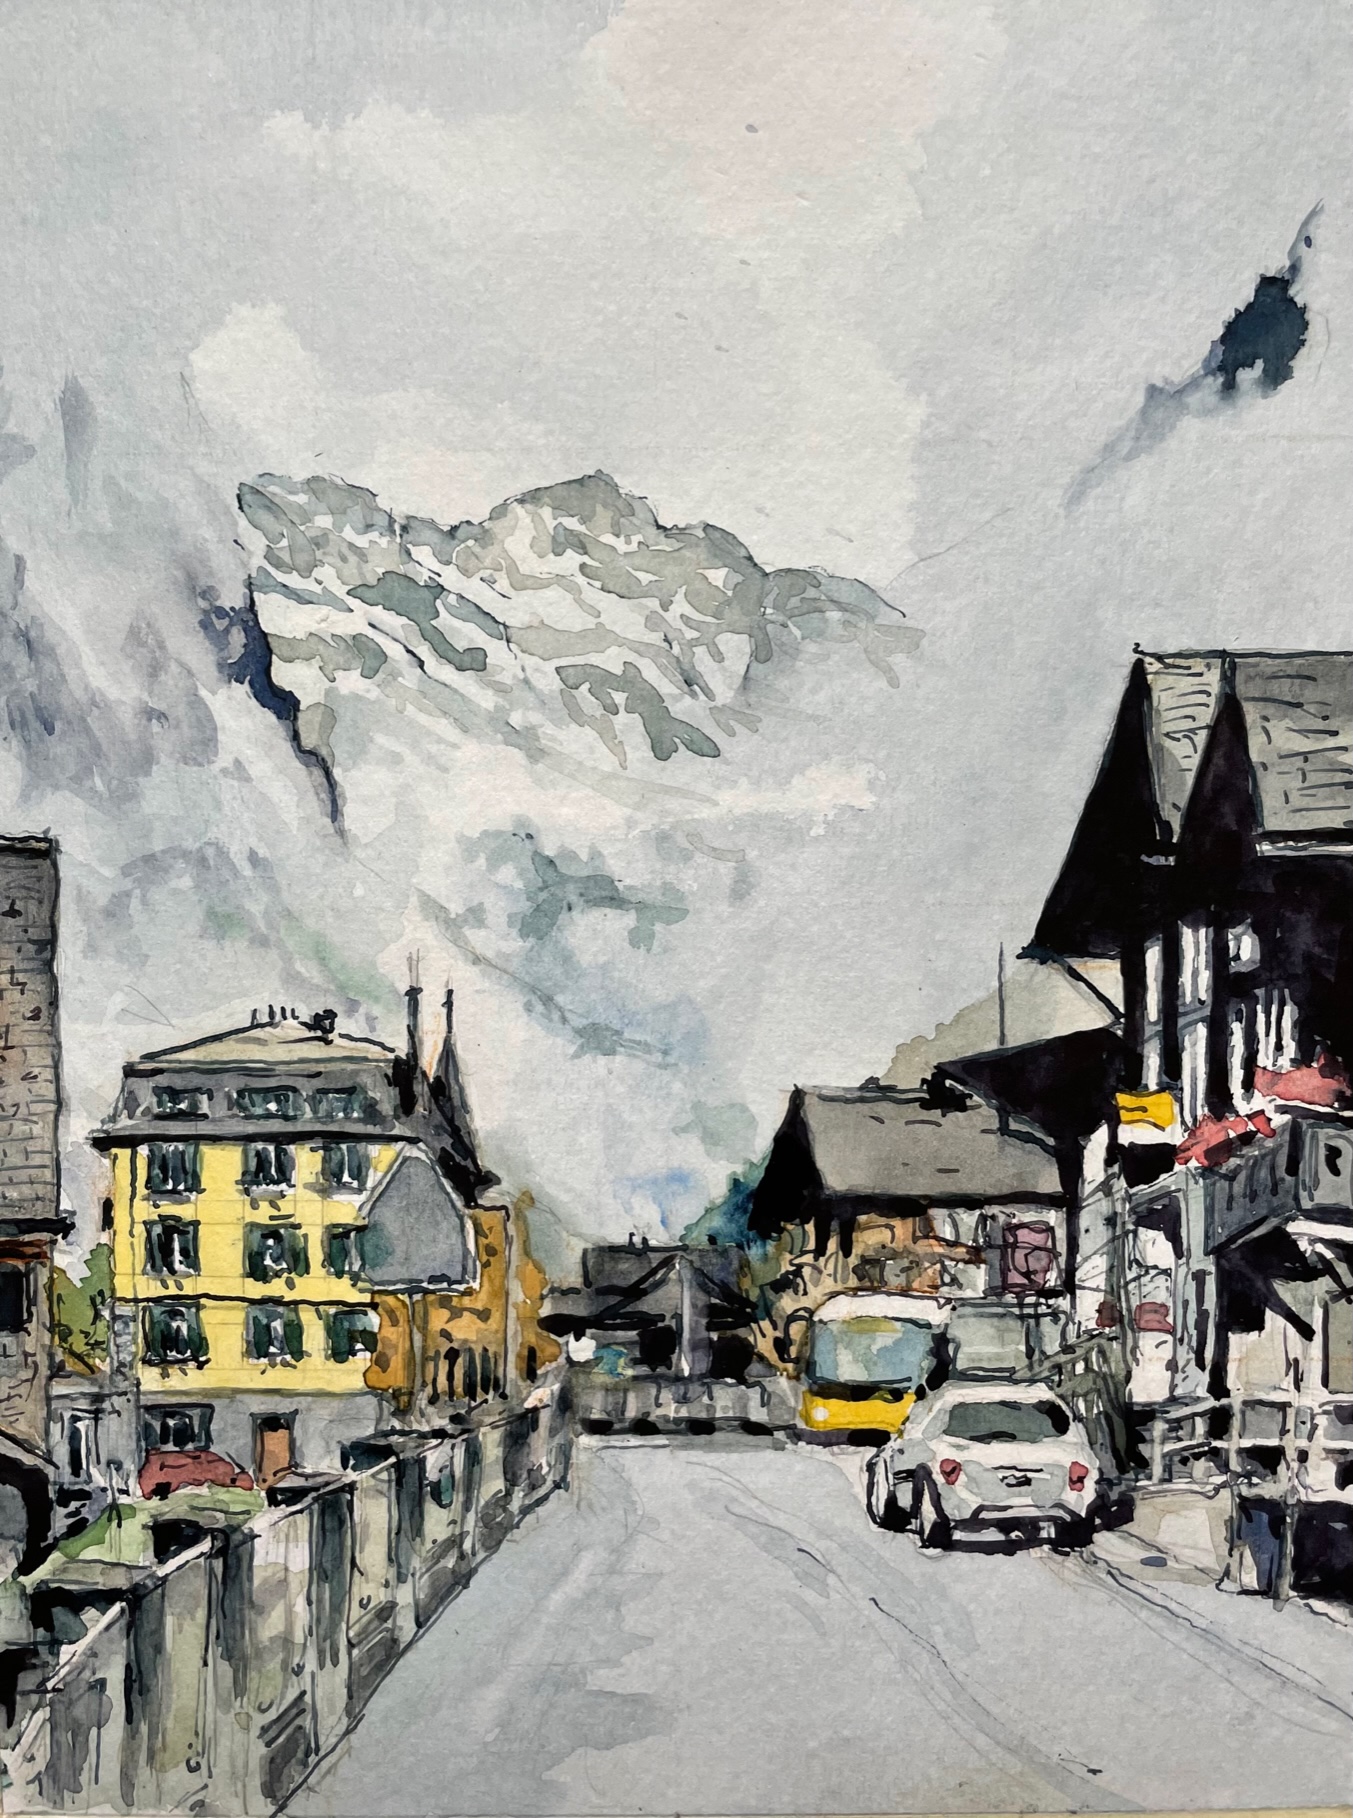 Farewell to Lauterbrunnen and the Alps